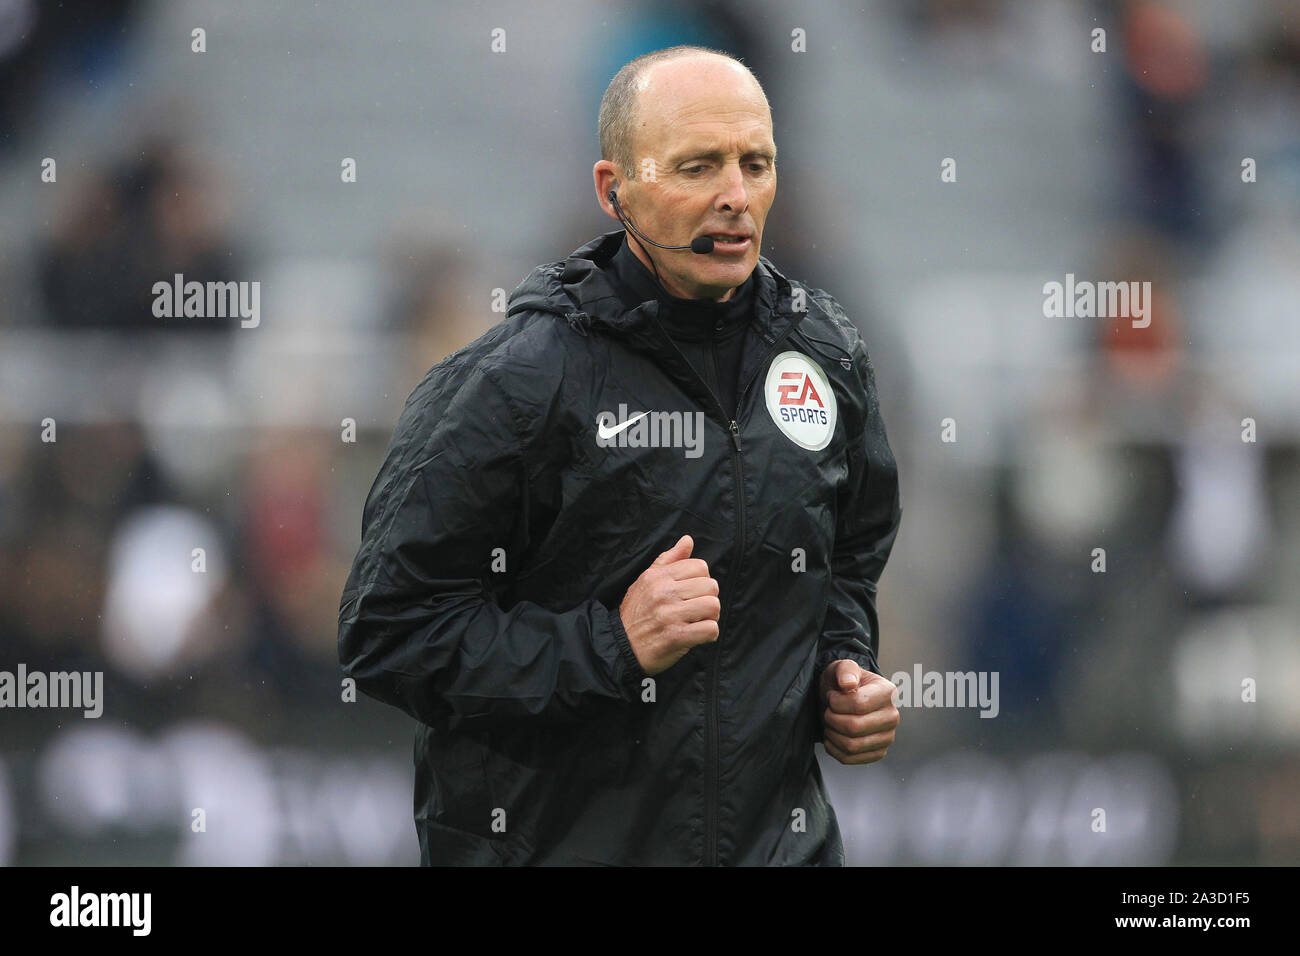 NEWCASTLE UPON TYNE, OCTOBER 6th  Mike Dean the match referee warms up prior to the Premier League match between Newcastle United and Manchester United at St. James's Park, Newcastle on Sunday 6th October 2019. (Credit: Mark Fletcher | MI News) Stock Photo